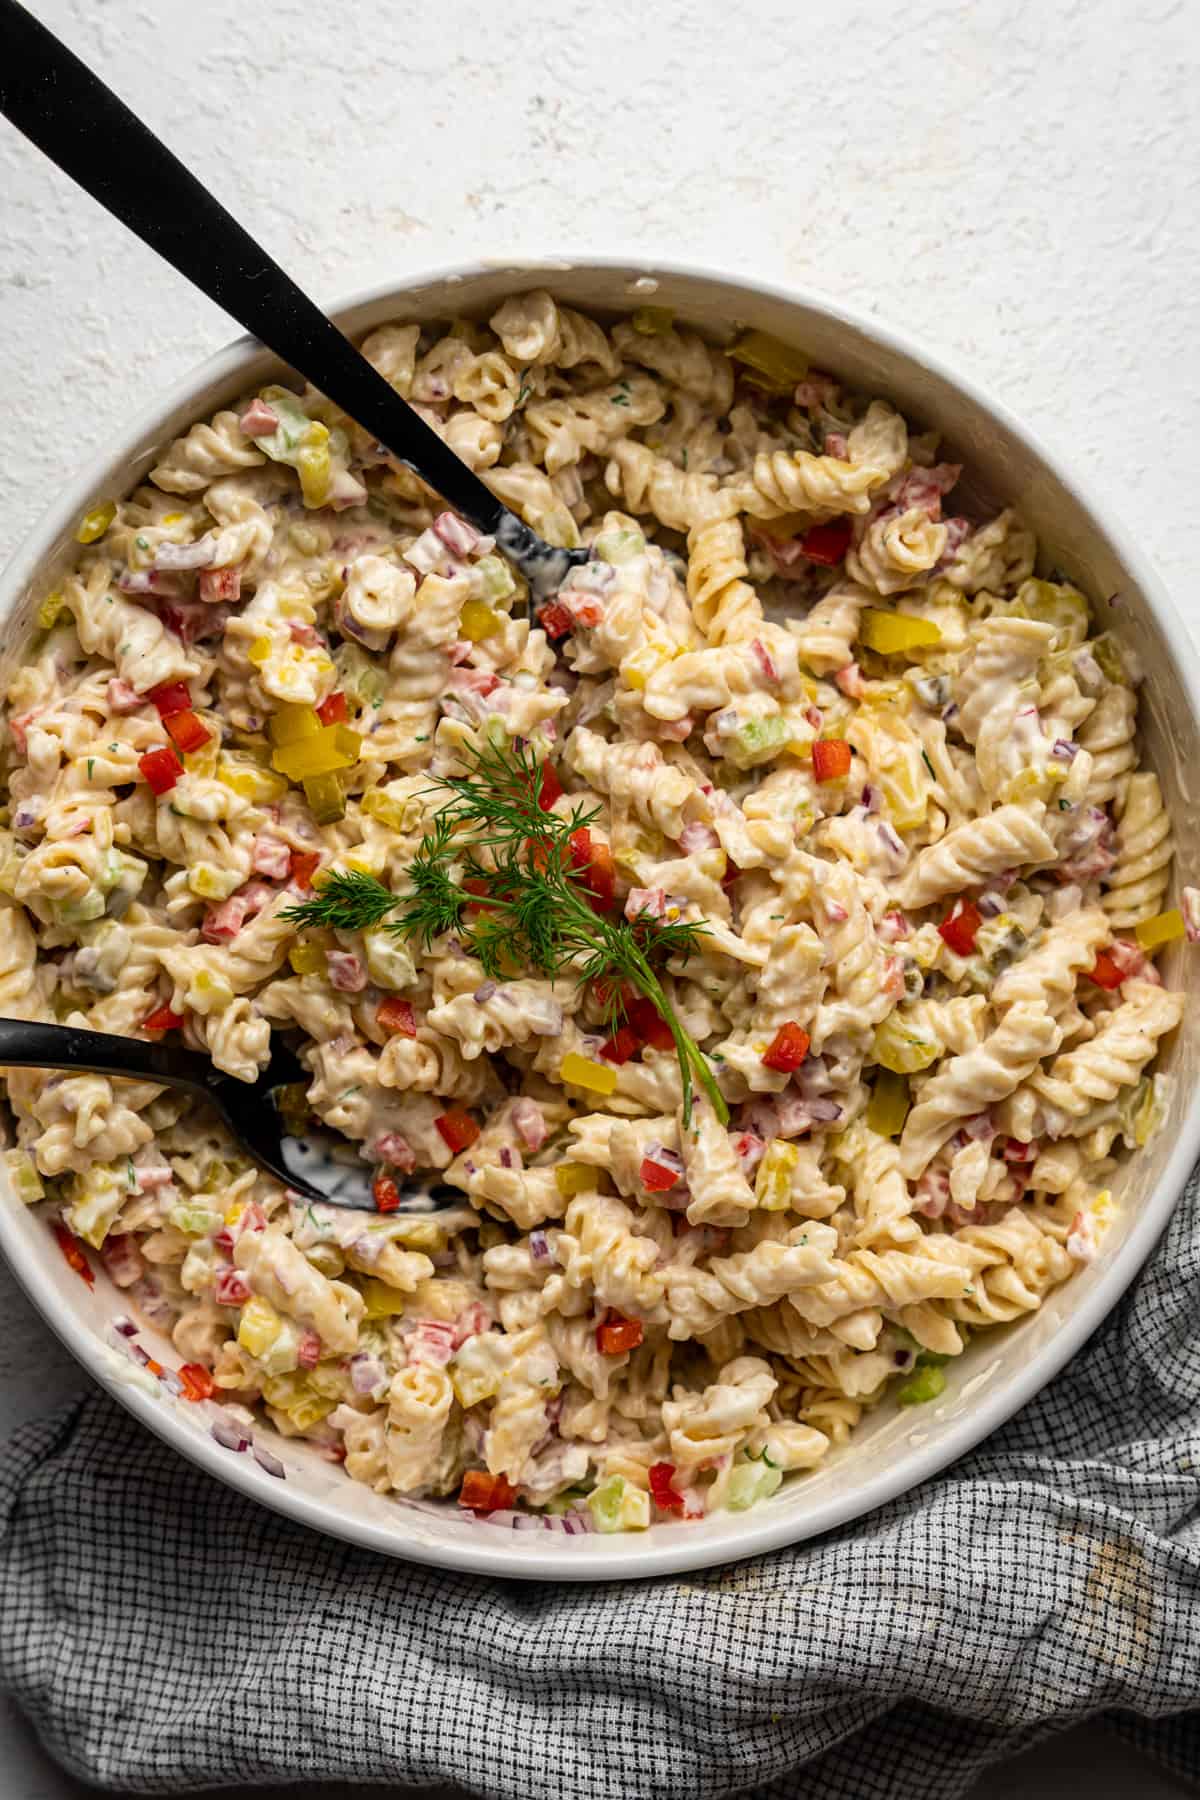 Spoons in a large bowl of dill pickle pasta salad.